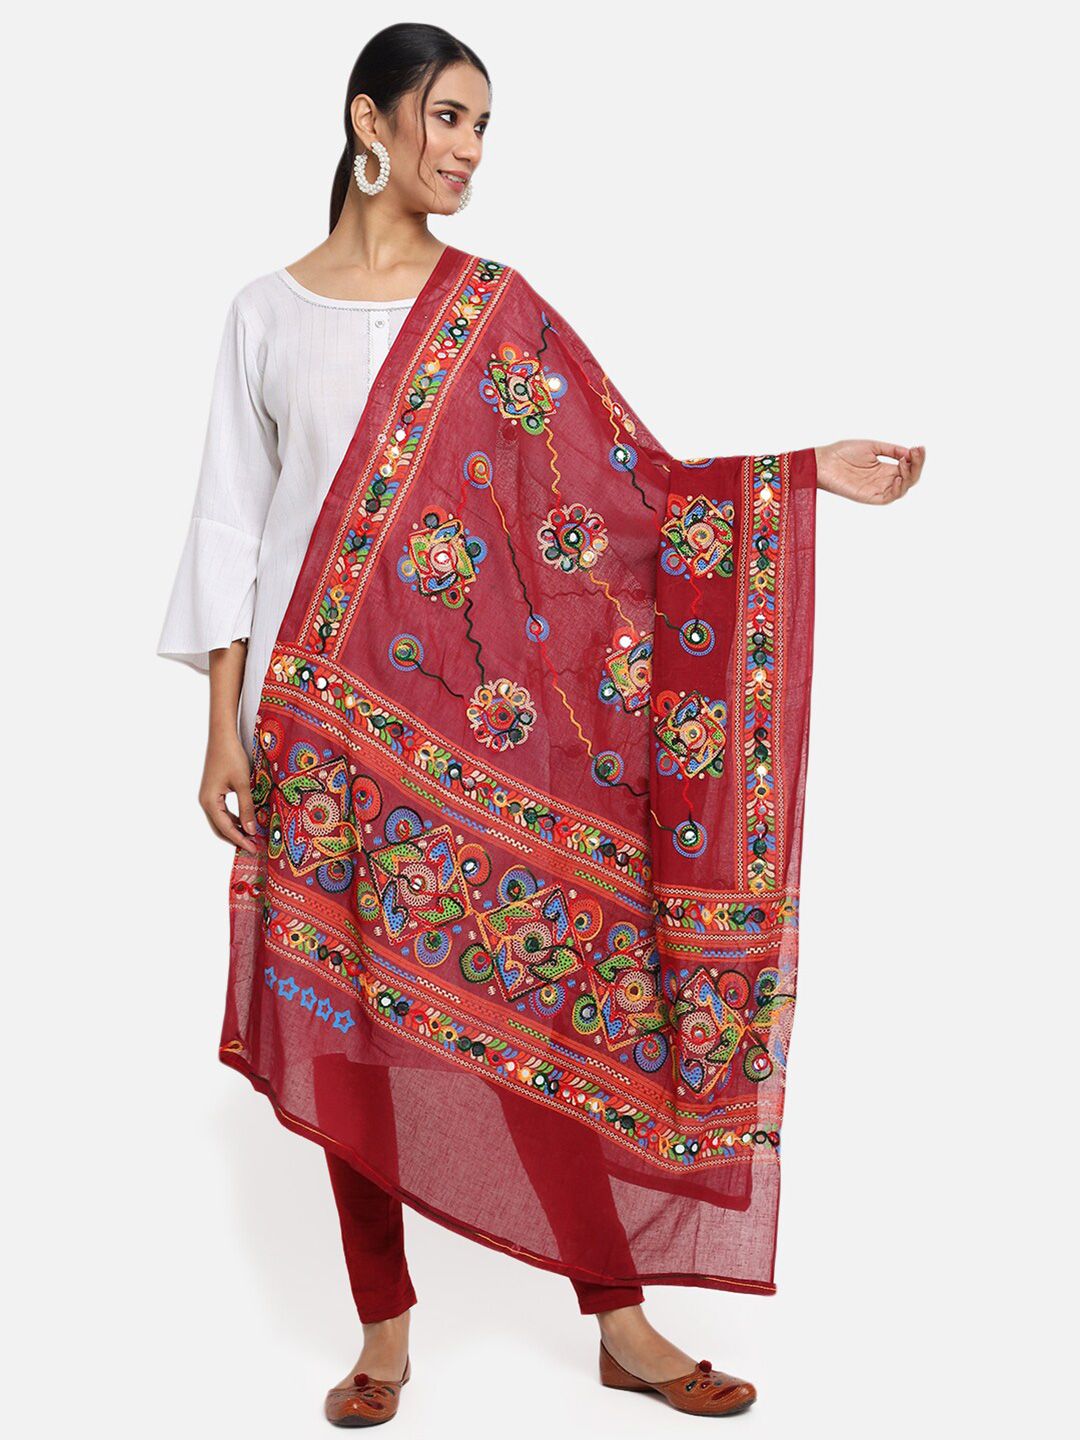 Vastraa Fusion Maroon & Blue Ethnic Motifs Embroidered Pure Cotton Dupatta with Mirror Work Price in India